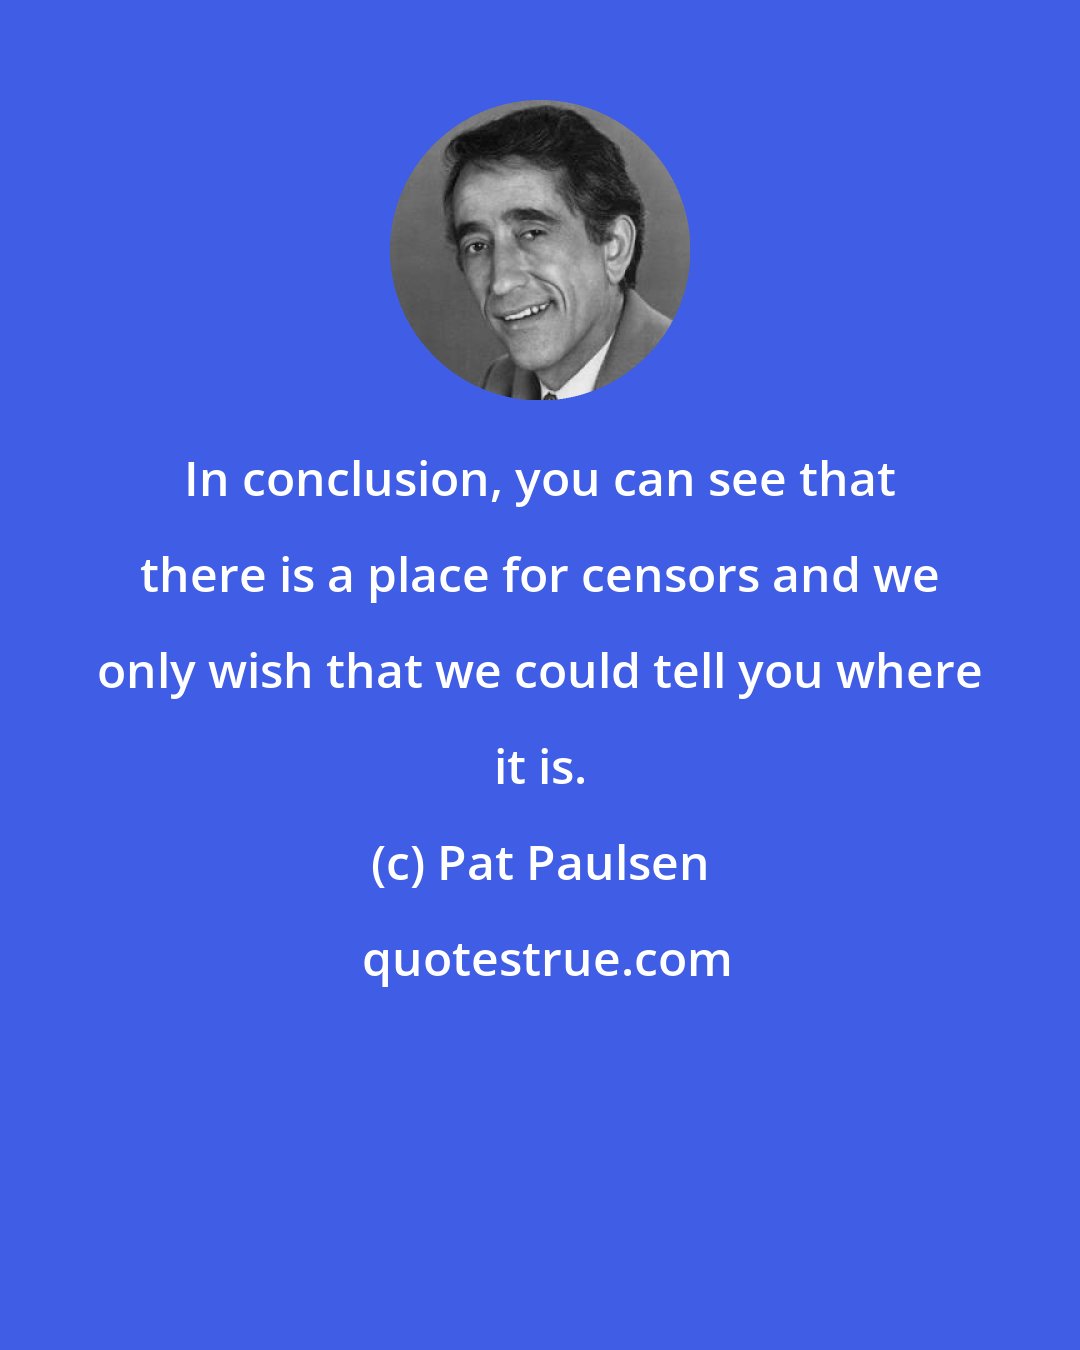 Pat Paulsen: In conclusion, you can see that there is a place for censors and we only wish that we could tell you where it is.